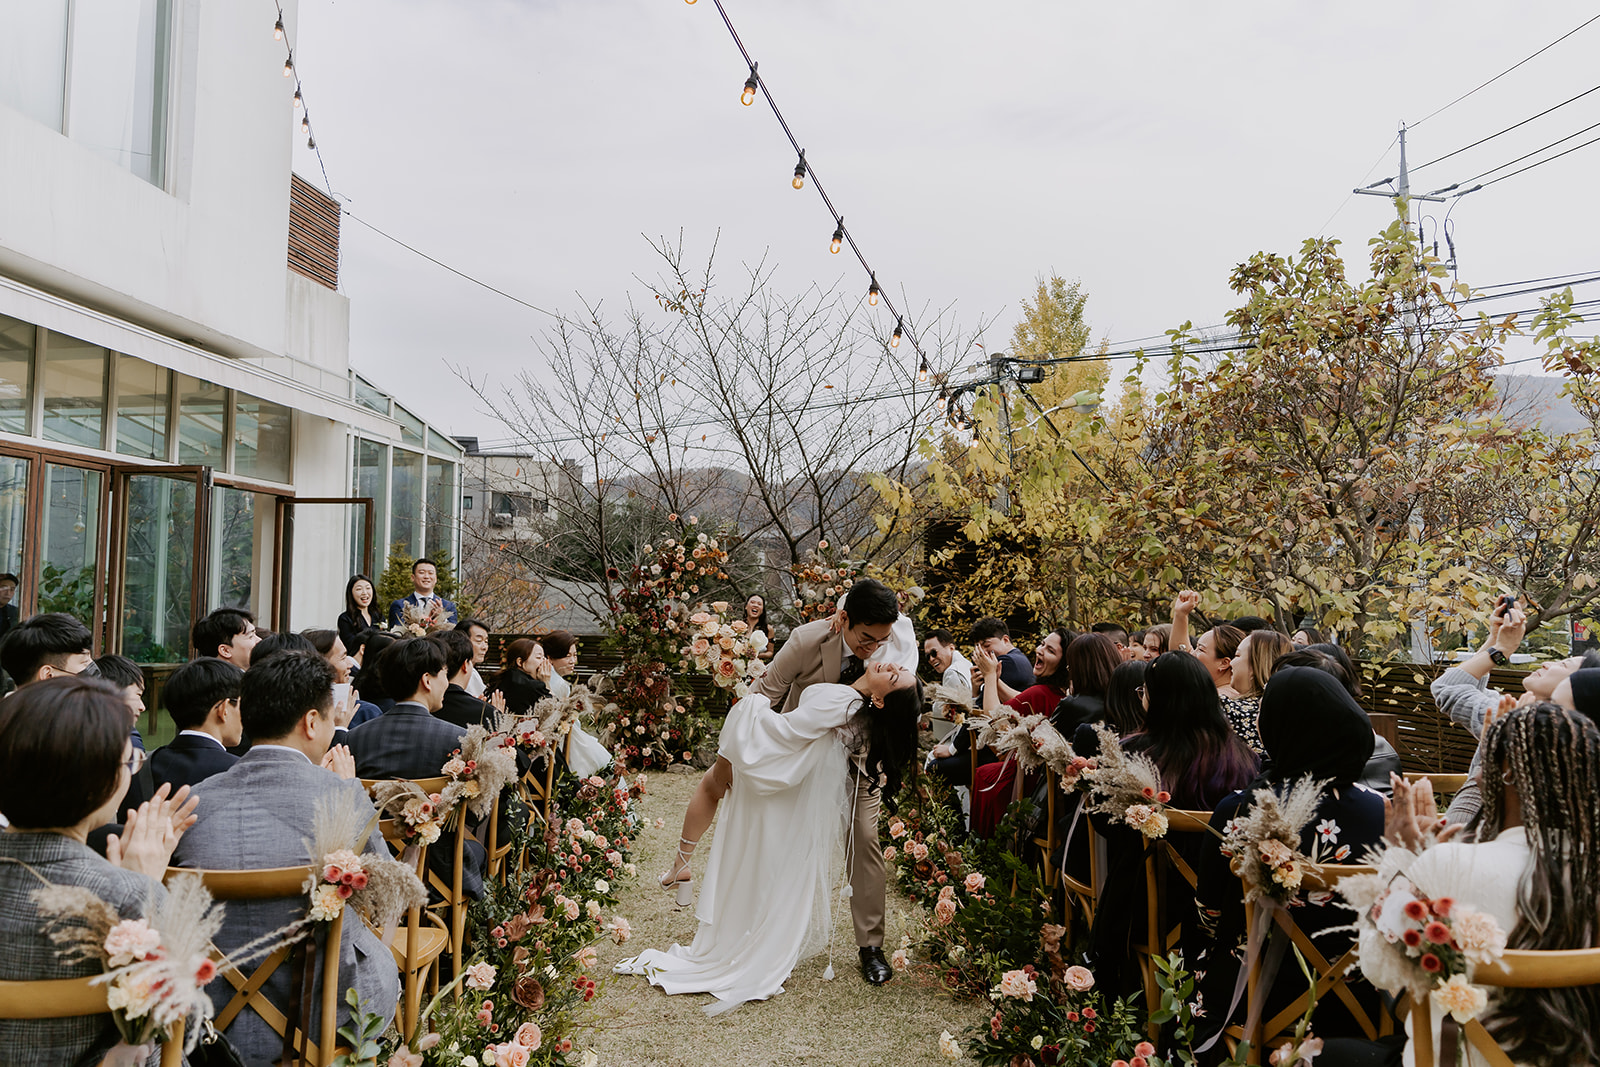 A bride and groom share a kiss on an aisle adorned with floral arrangements at an outdoor wedding ceremony with guests.